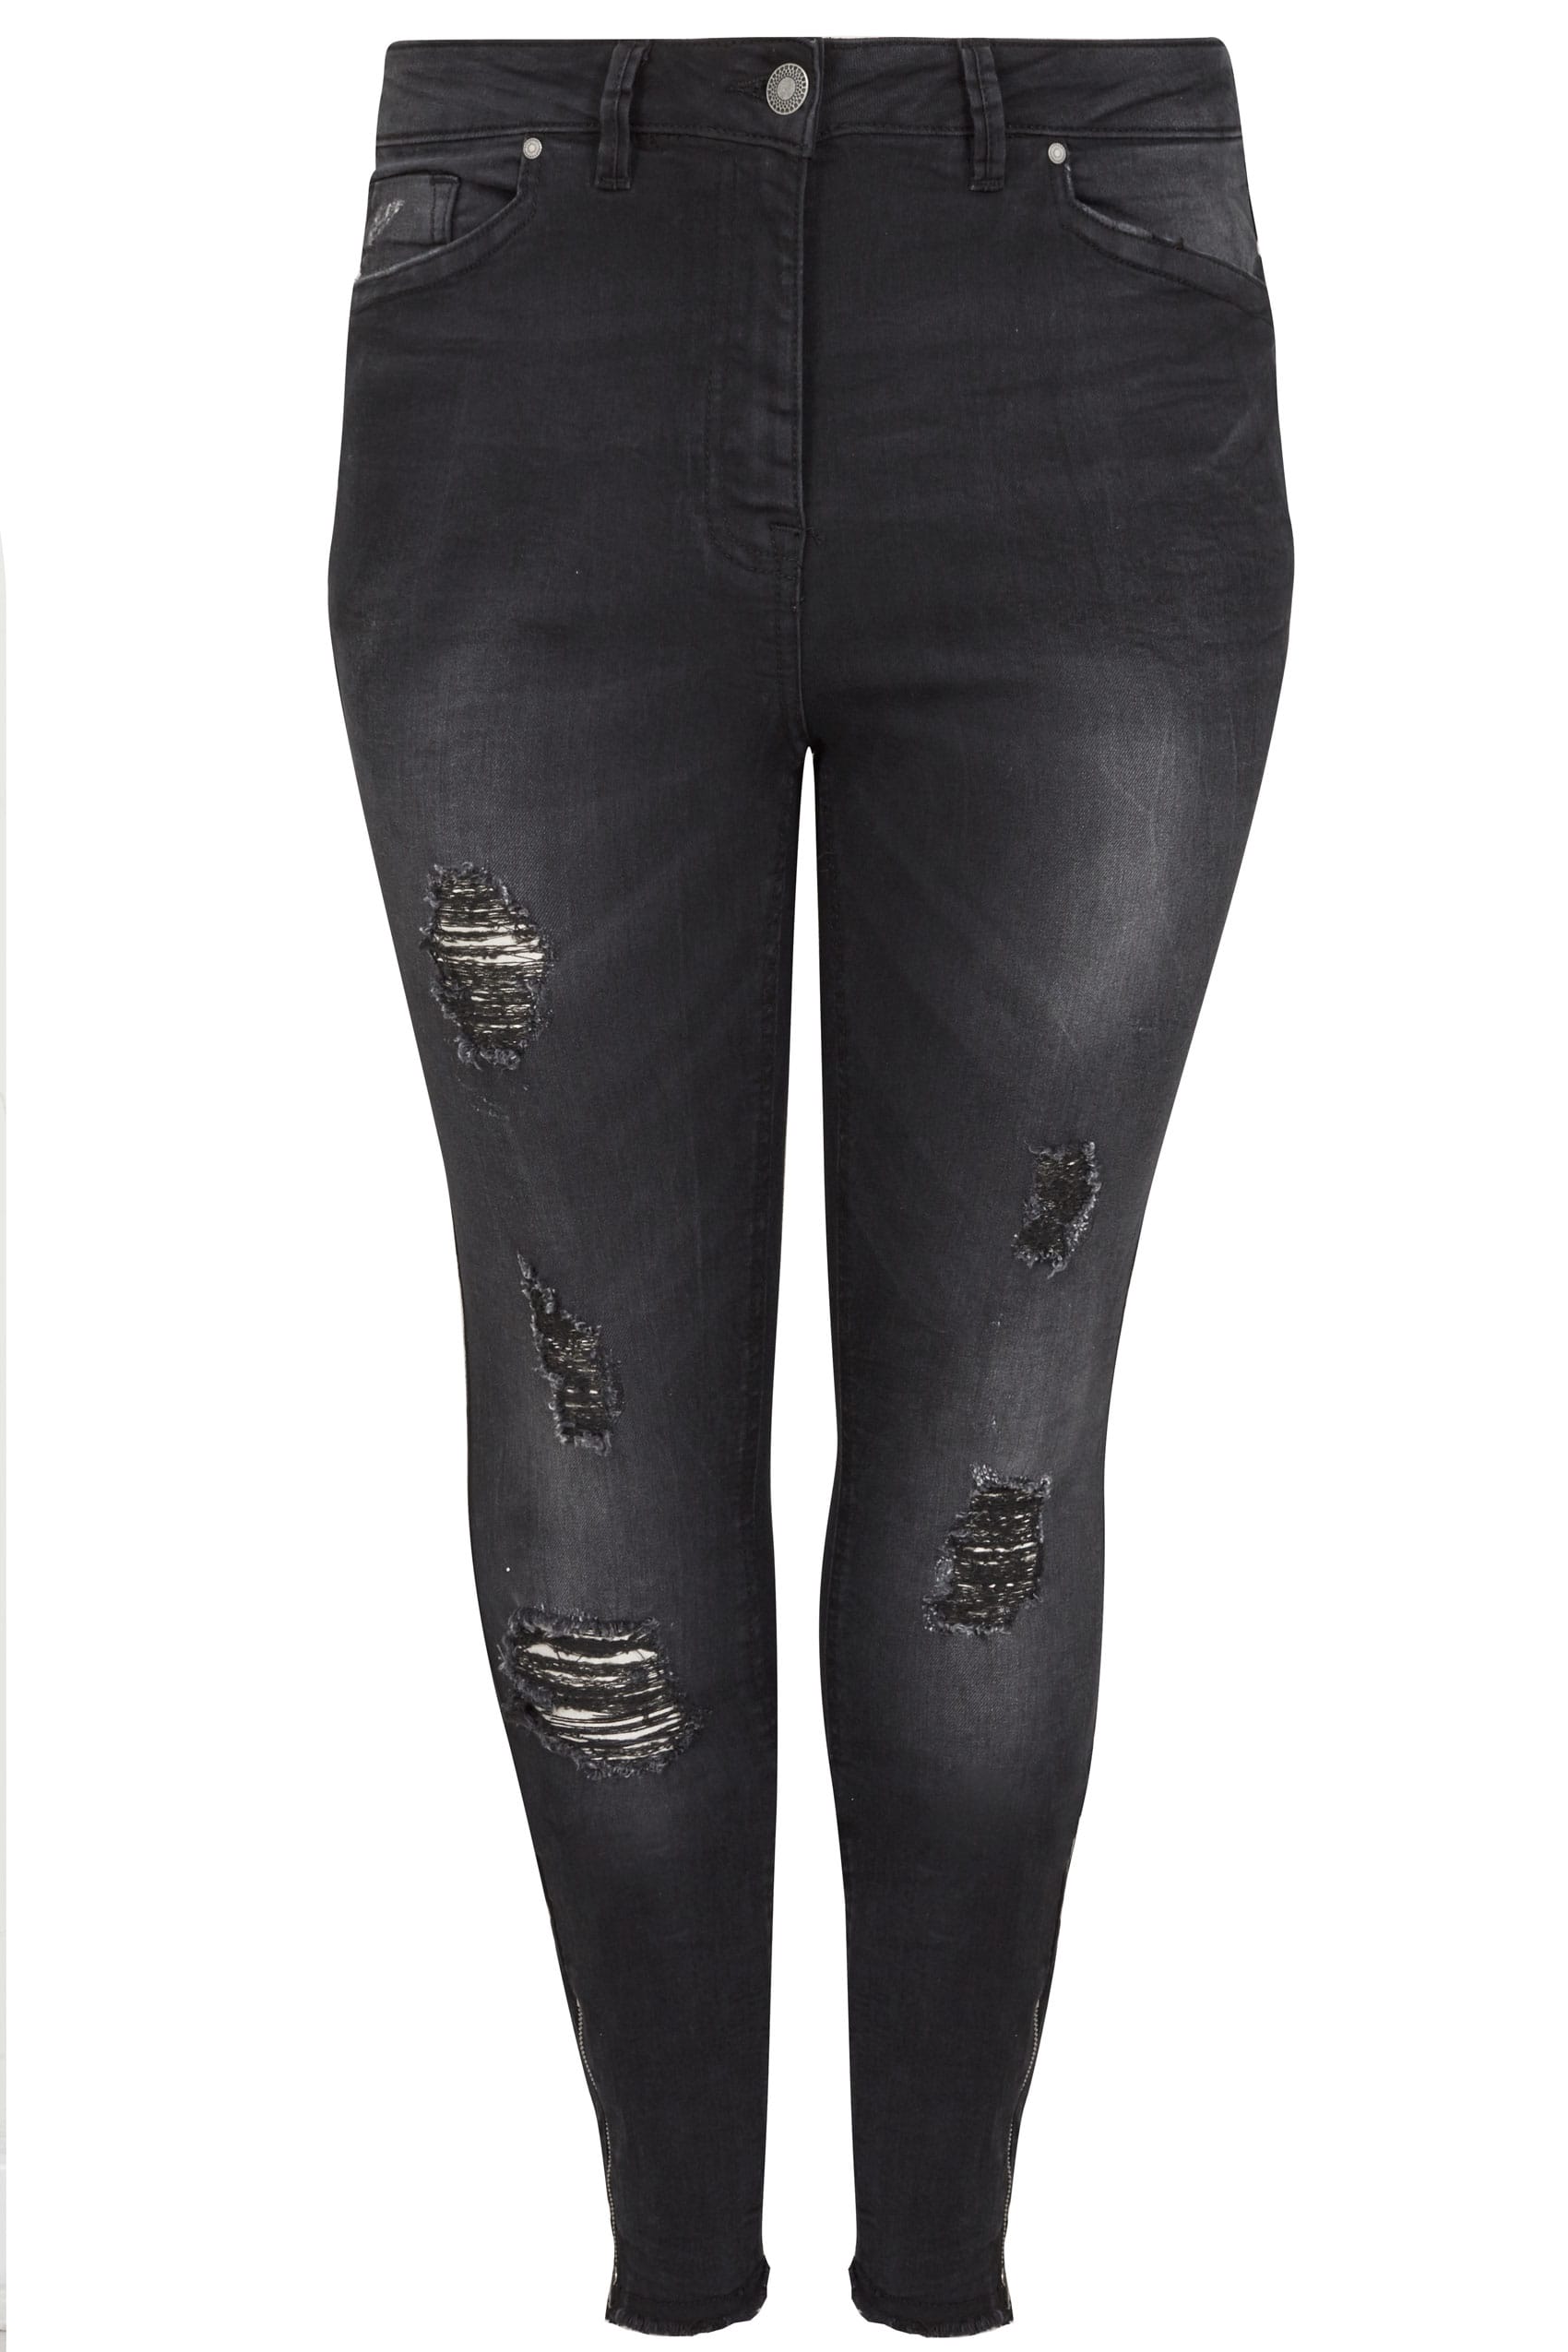 Download LIMITED COLLECTION Black Ripped Skinny Jeans With Zip Hem, plus size 16 to 36